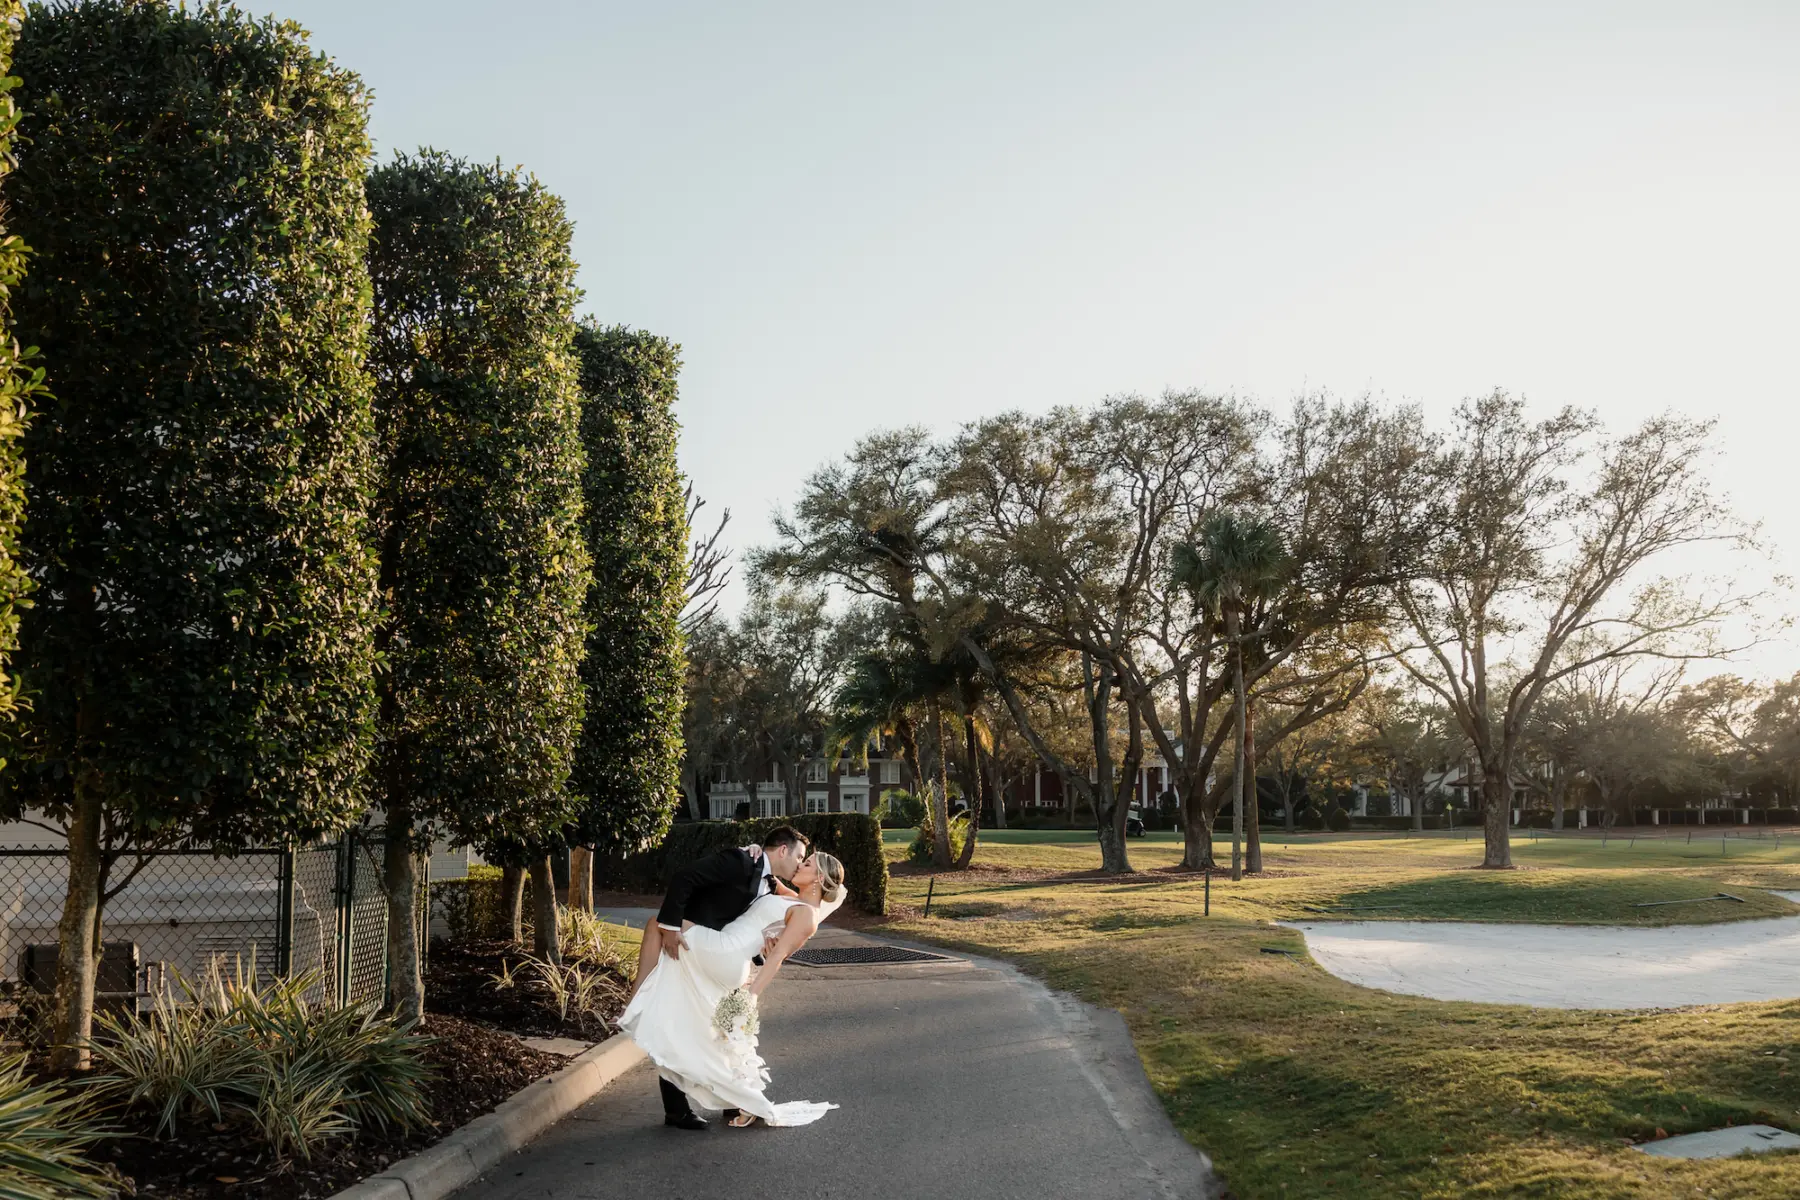 Romantic Bride and Groom Golf Course Wedding Portrait | South Tampa Venue Palma Ceia Golf and Country Club | Planner Oh My Occasions